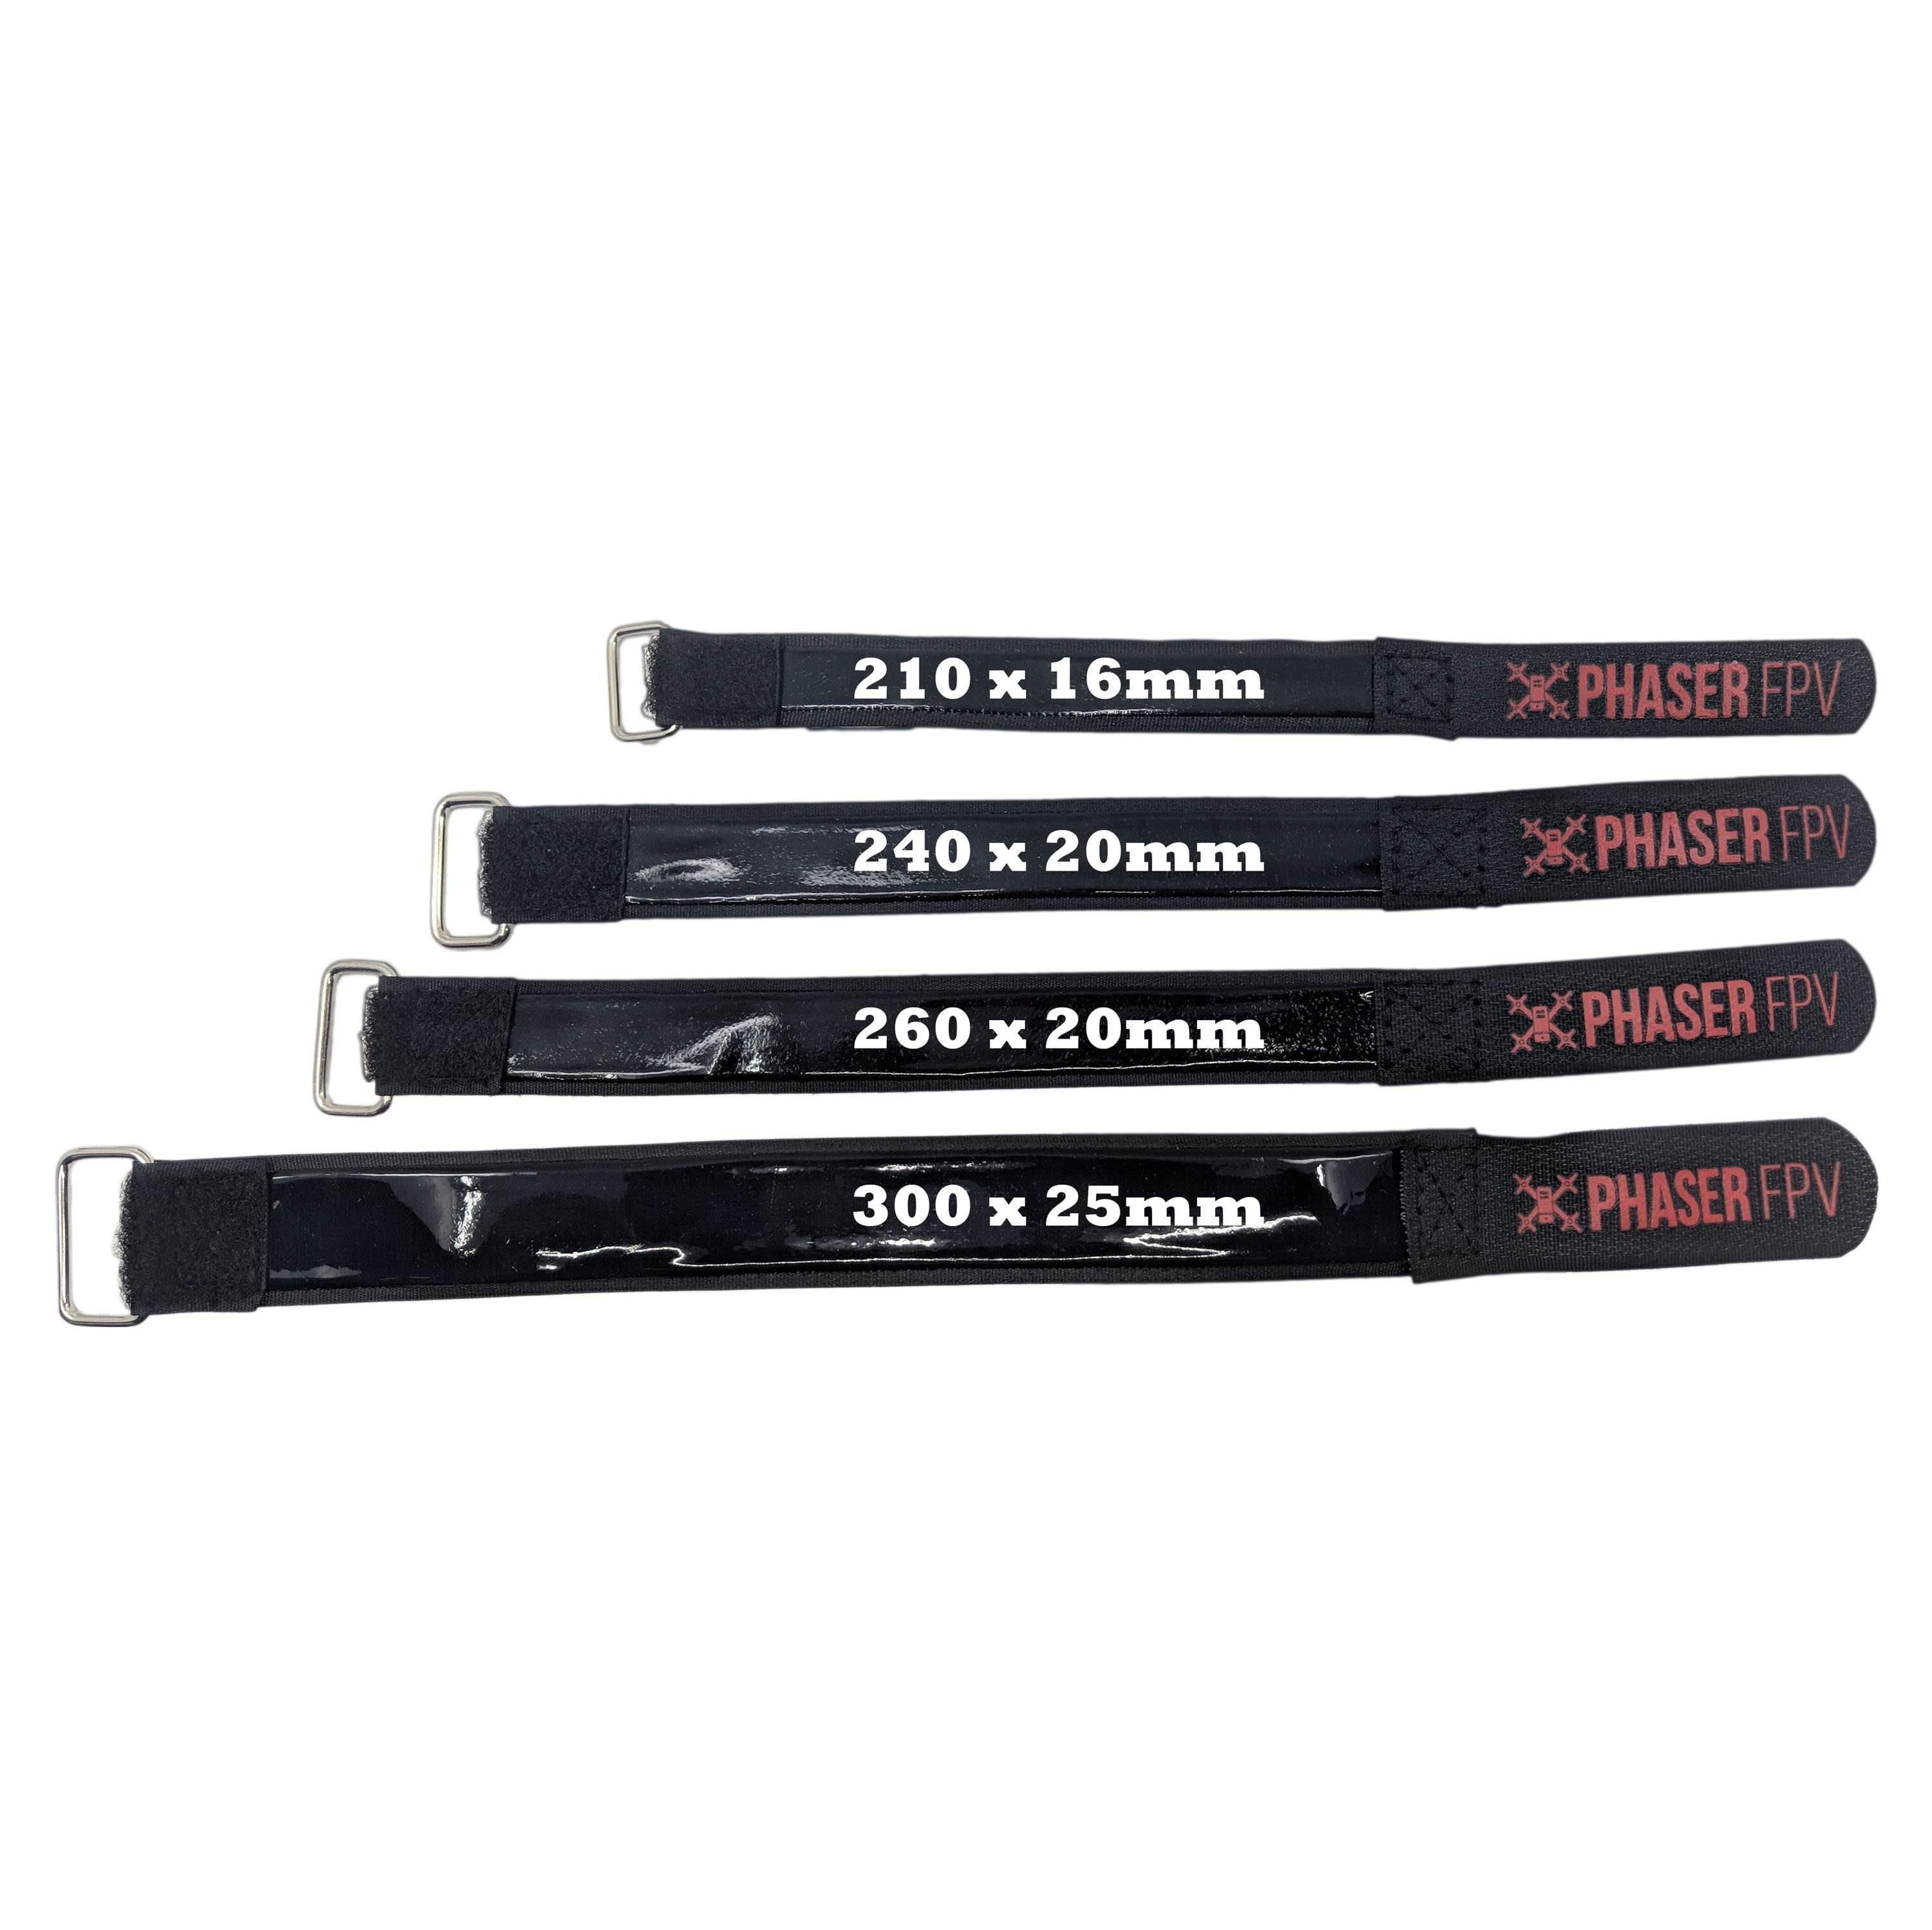 Lipo Battery Strap 300x25mm With Non-slip Coating Phaser FPV Branded